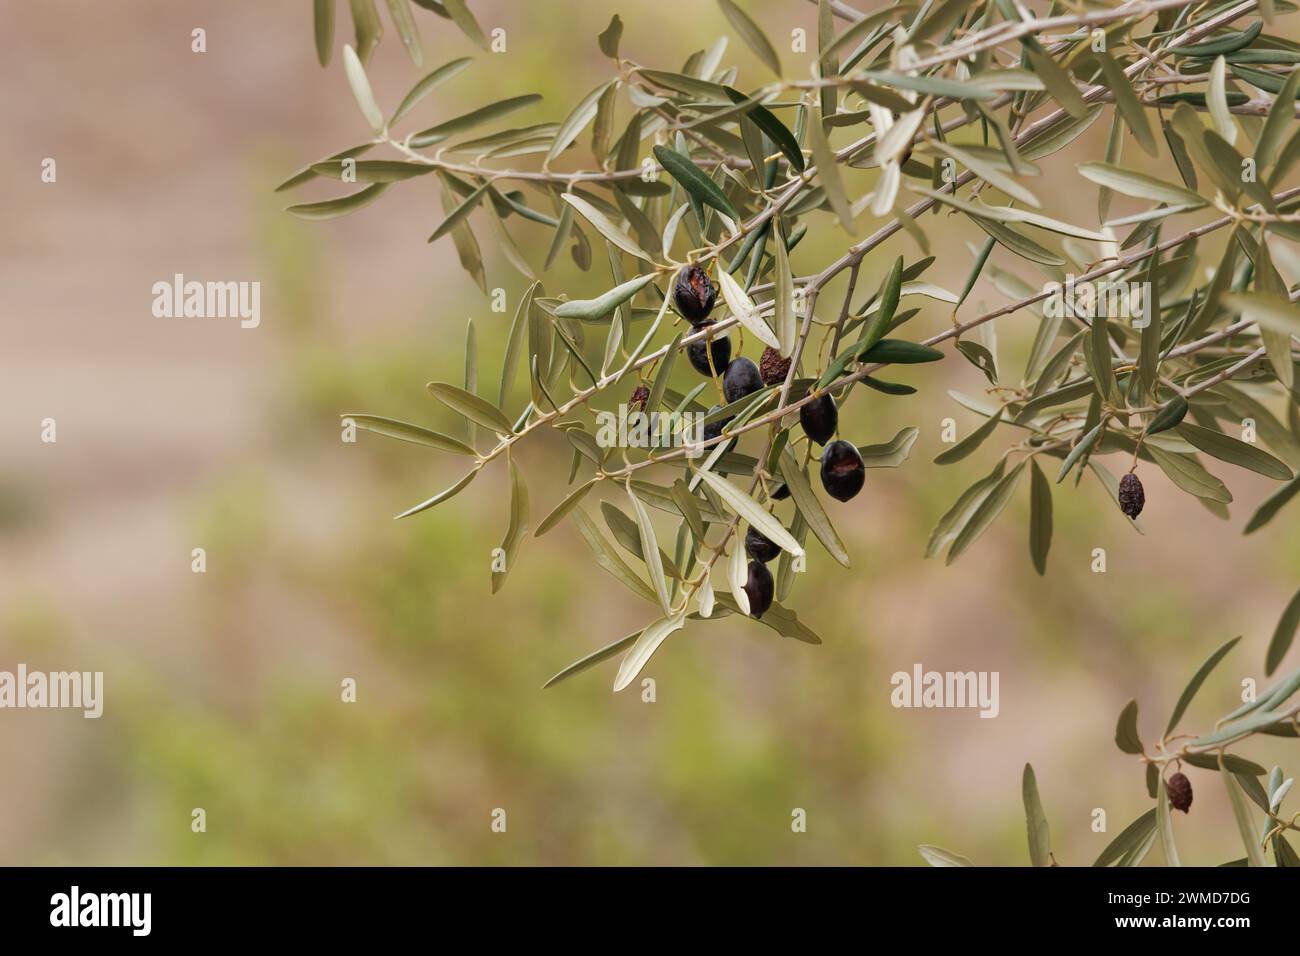 Ripe olives not harvested in the month of February used as food for sustainable wildlife, Alcoy, Spain Stock Photo